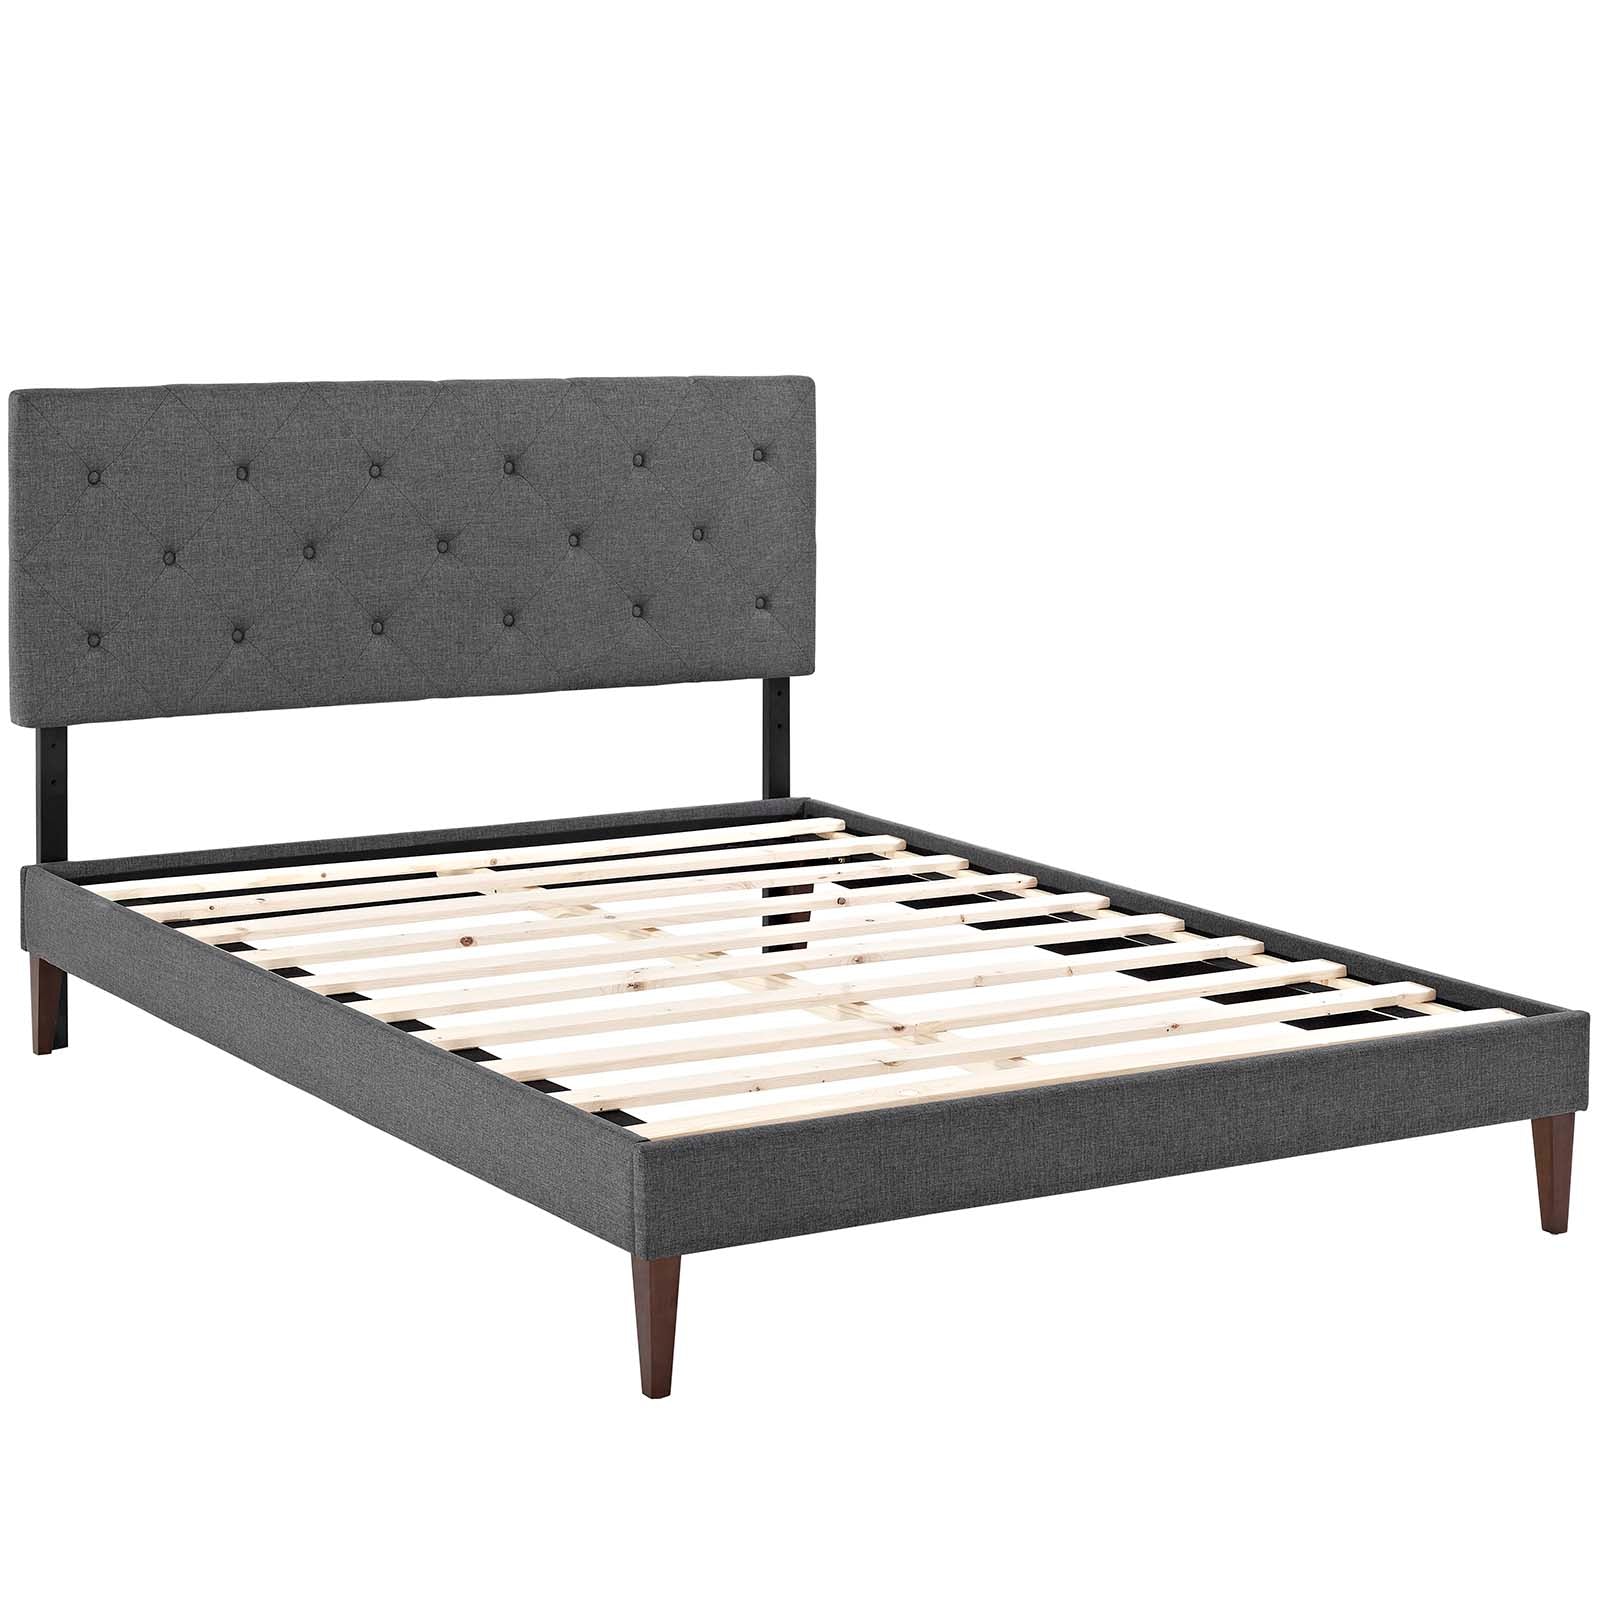 Tarah King Fabric Platform Bed with Squared Tapered Legs